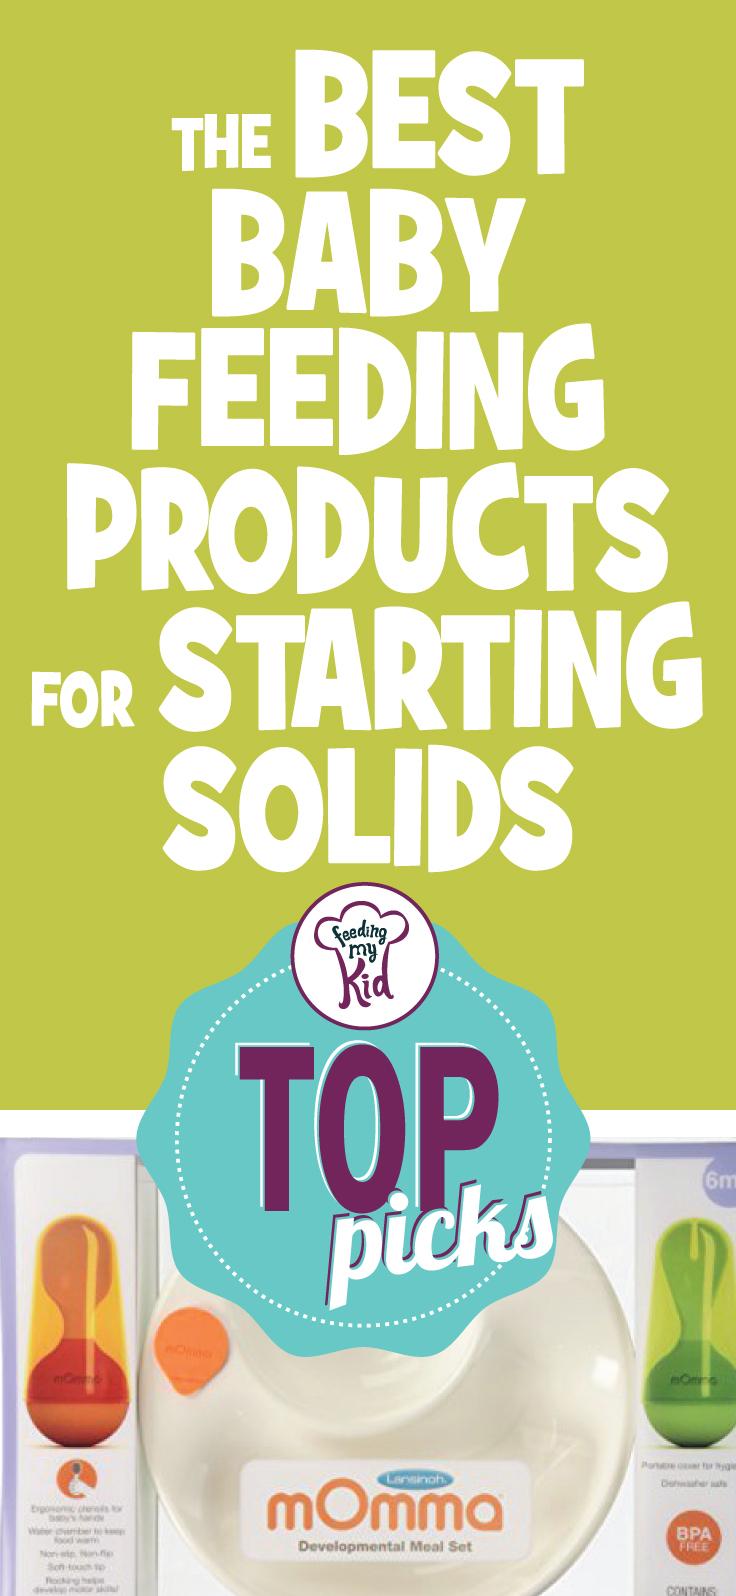 Top Picks: The Best Baby Feeding Products For Starting Solids - This is a must Pin! From flap gerber cereal rice to a munchkin fresh food feeder; these products are here to help you feed your kid. This is a must pin! #fmk #feedingsolids #introducingsolids #babyfeeding 